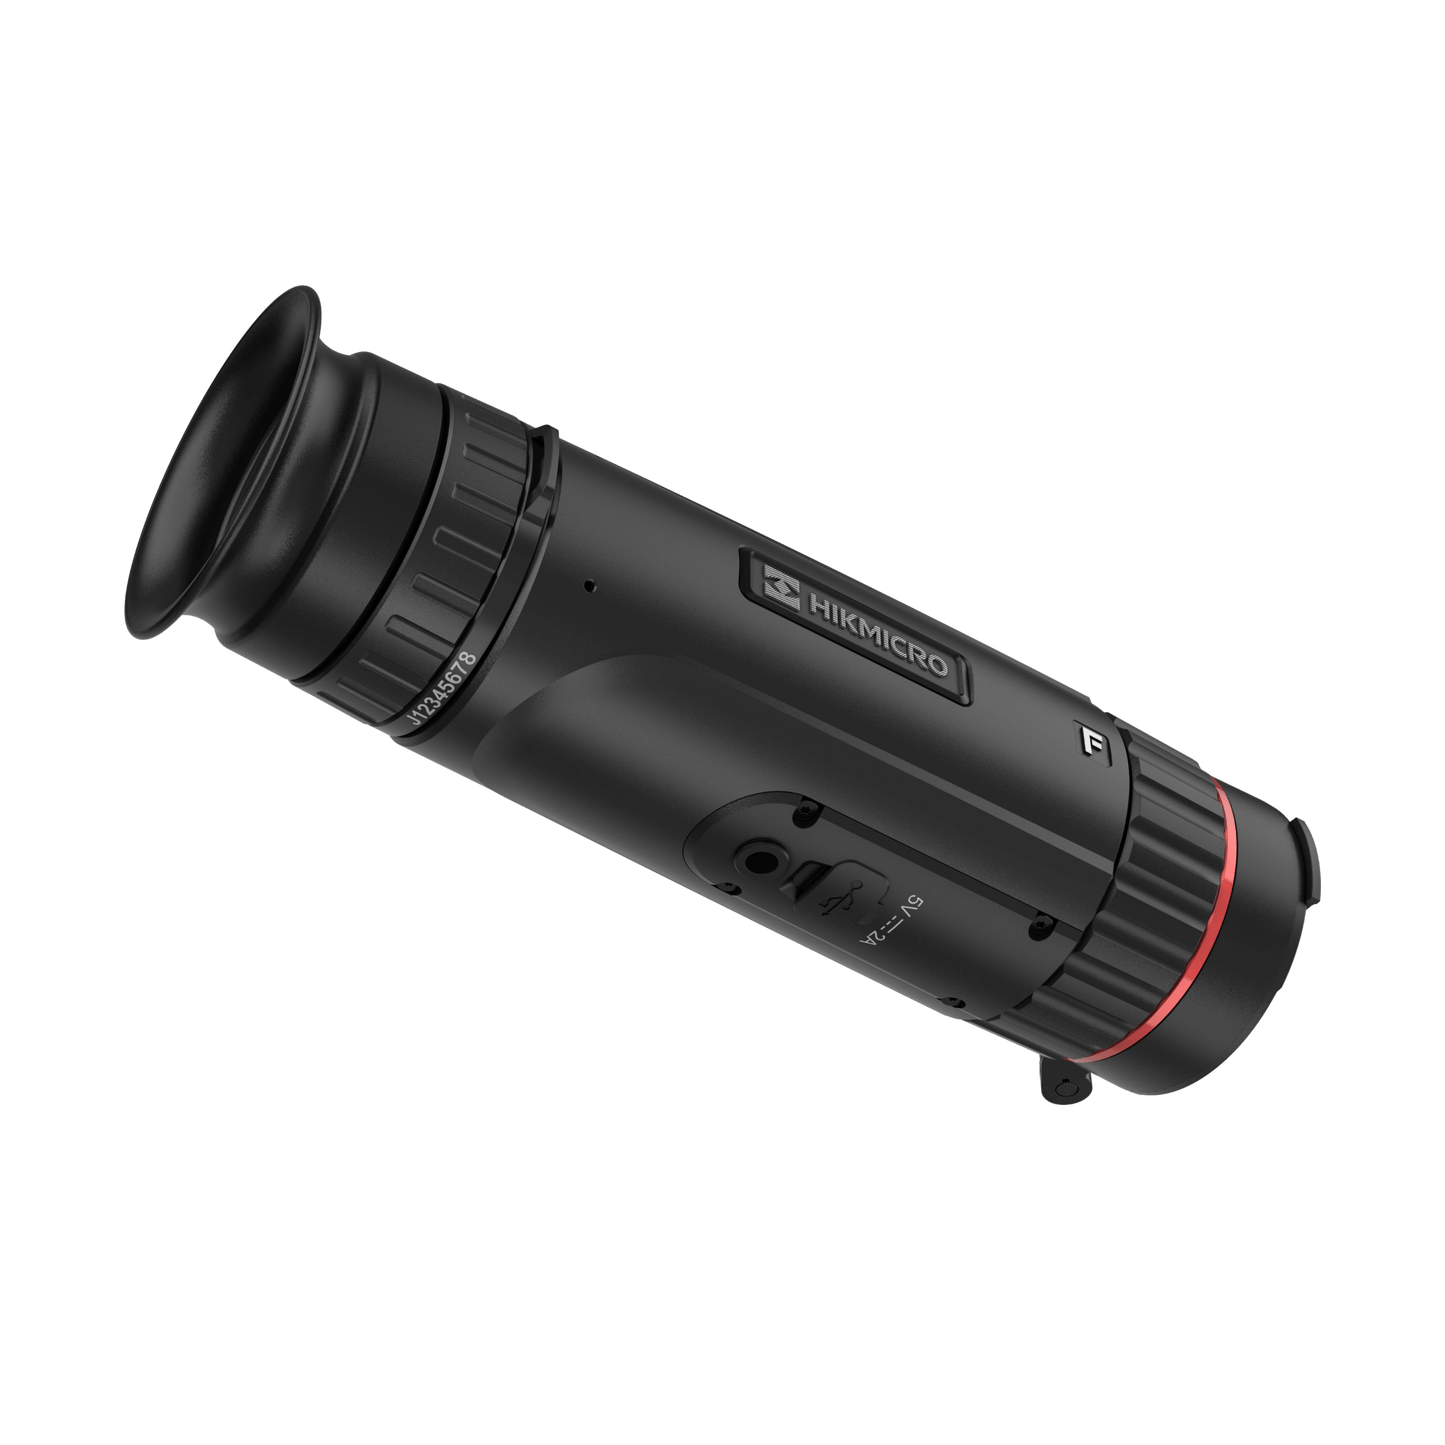 HikMicro Thermal Imaging Monocular for Sale - HikMicro Falcon Series FH25 - HM-TS43-25XG_W-FH25 - Right Side View from Bottom